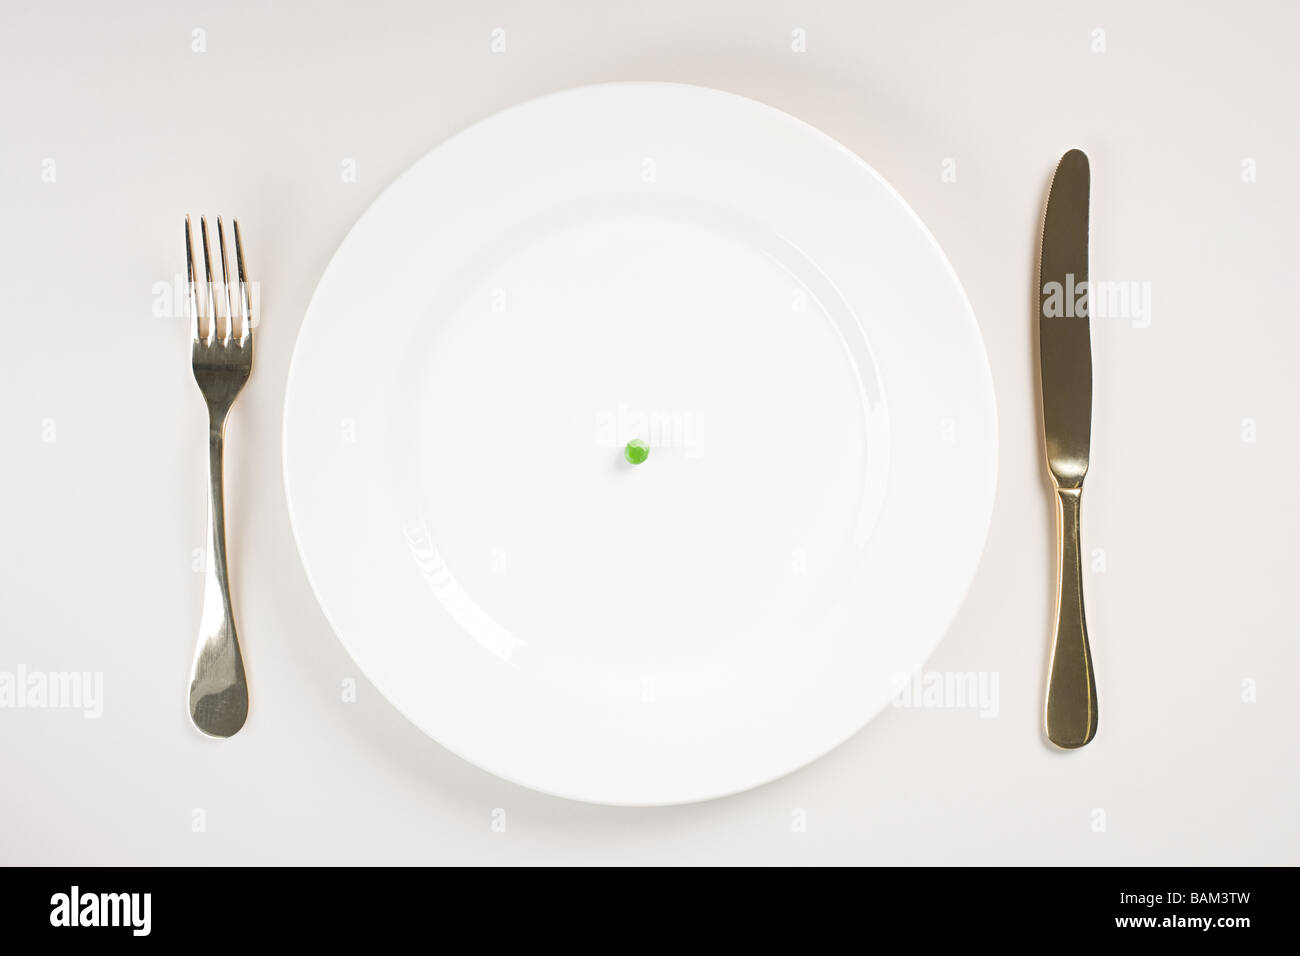 A pea on a plate Stock Photo